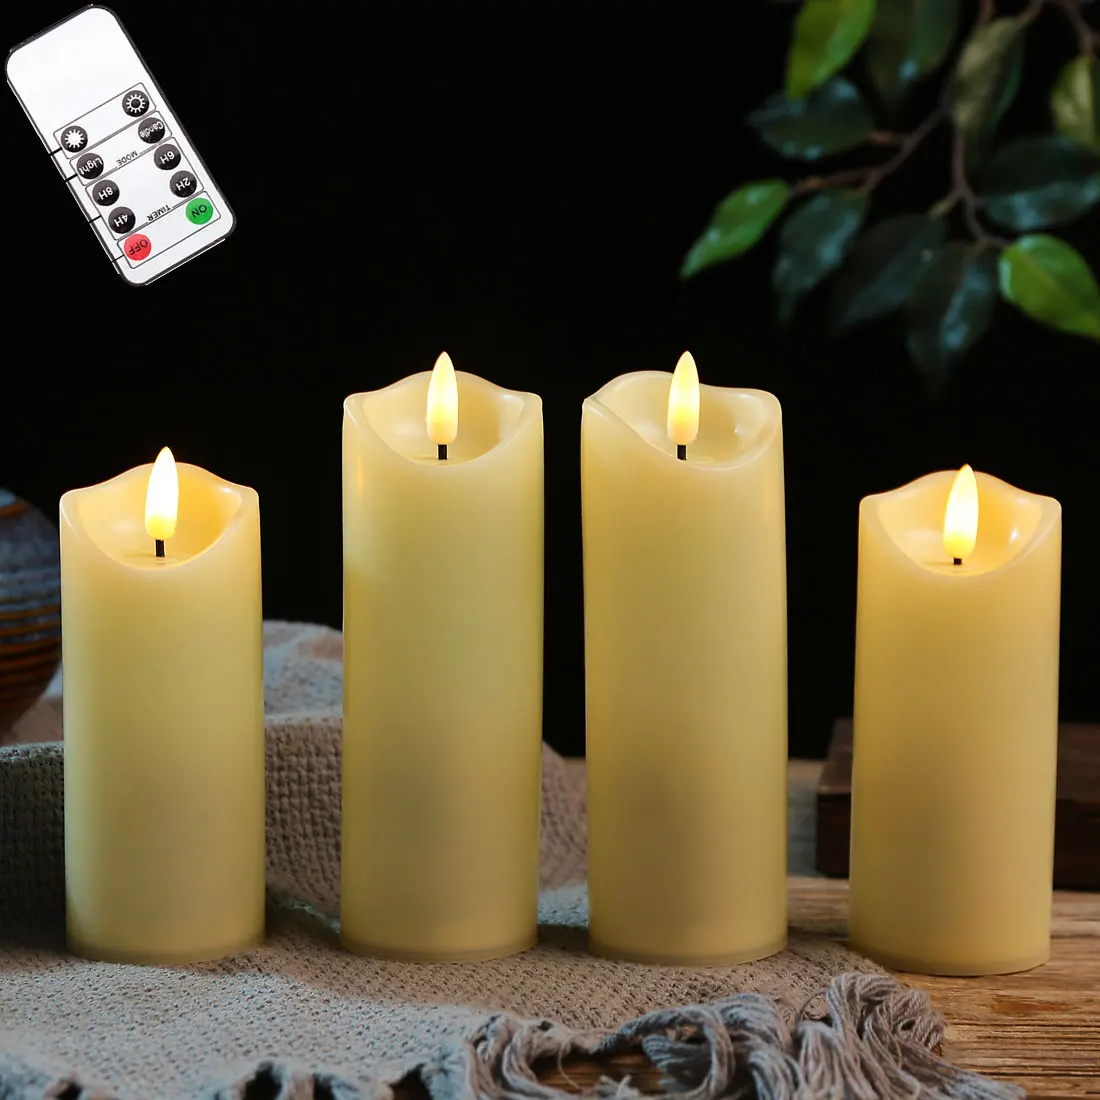 Flickering Light Warm White Remote Control LED Candles,Battery Powered Electric Fake Flameless Votive Candles For Wedding Church